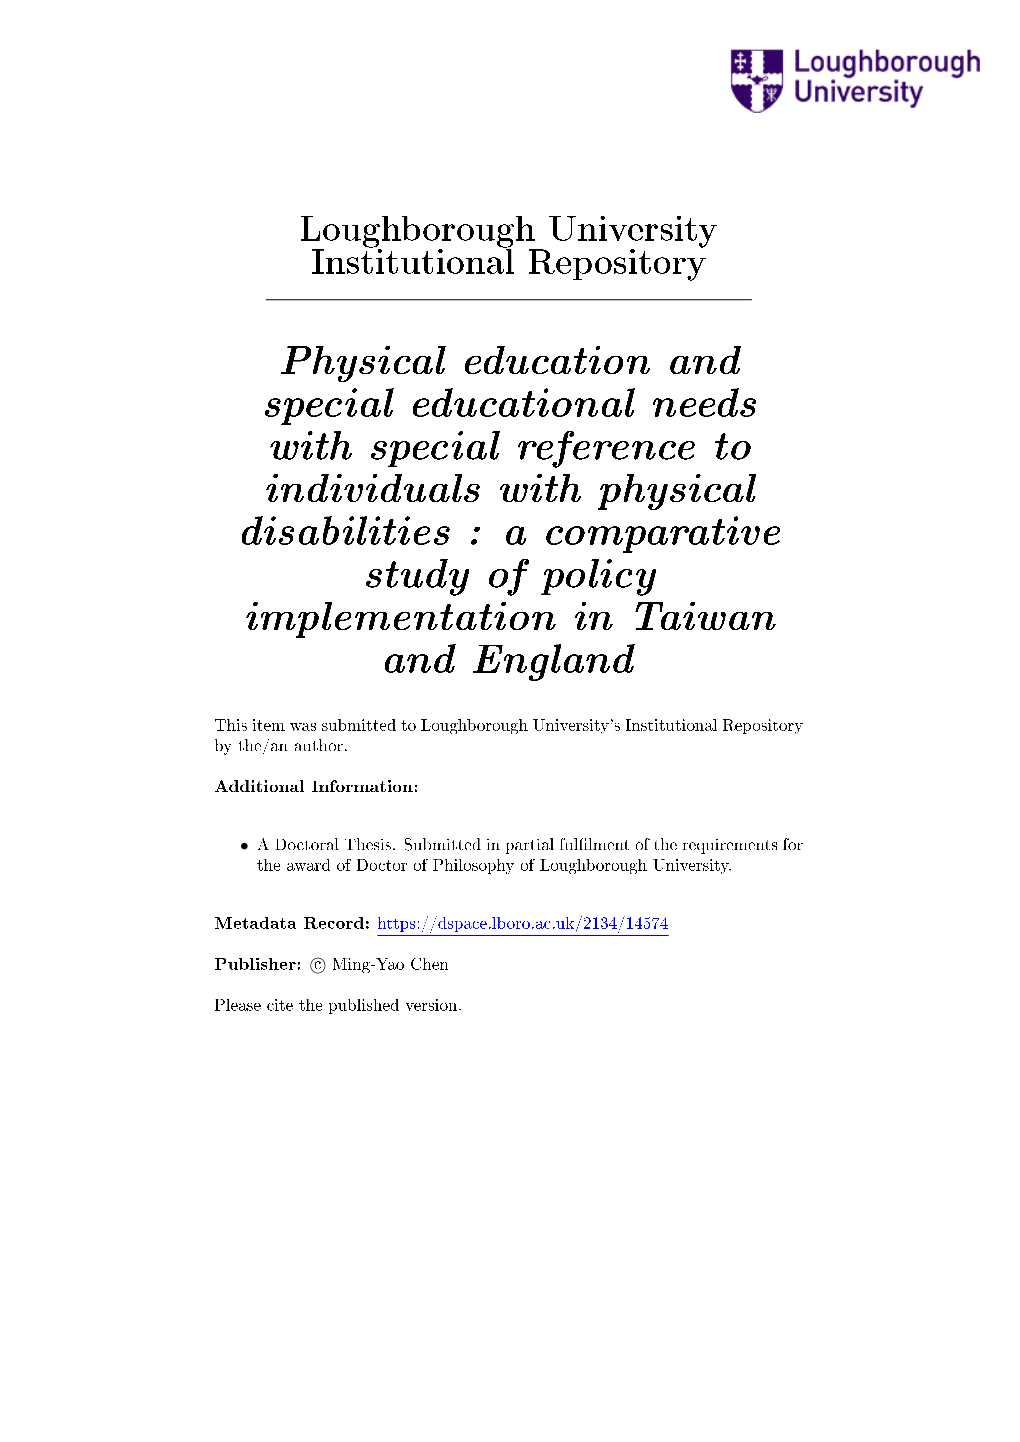 Physical Education and Special Educational Needs with Special Reference to Individuals with Physical Disabilities : a Comparativ